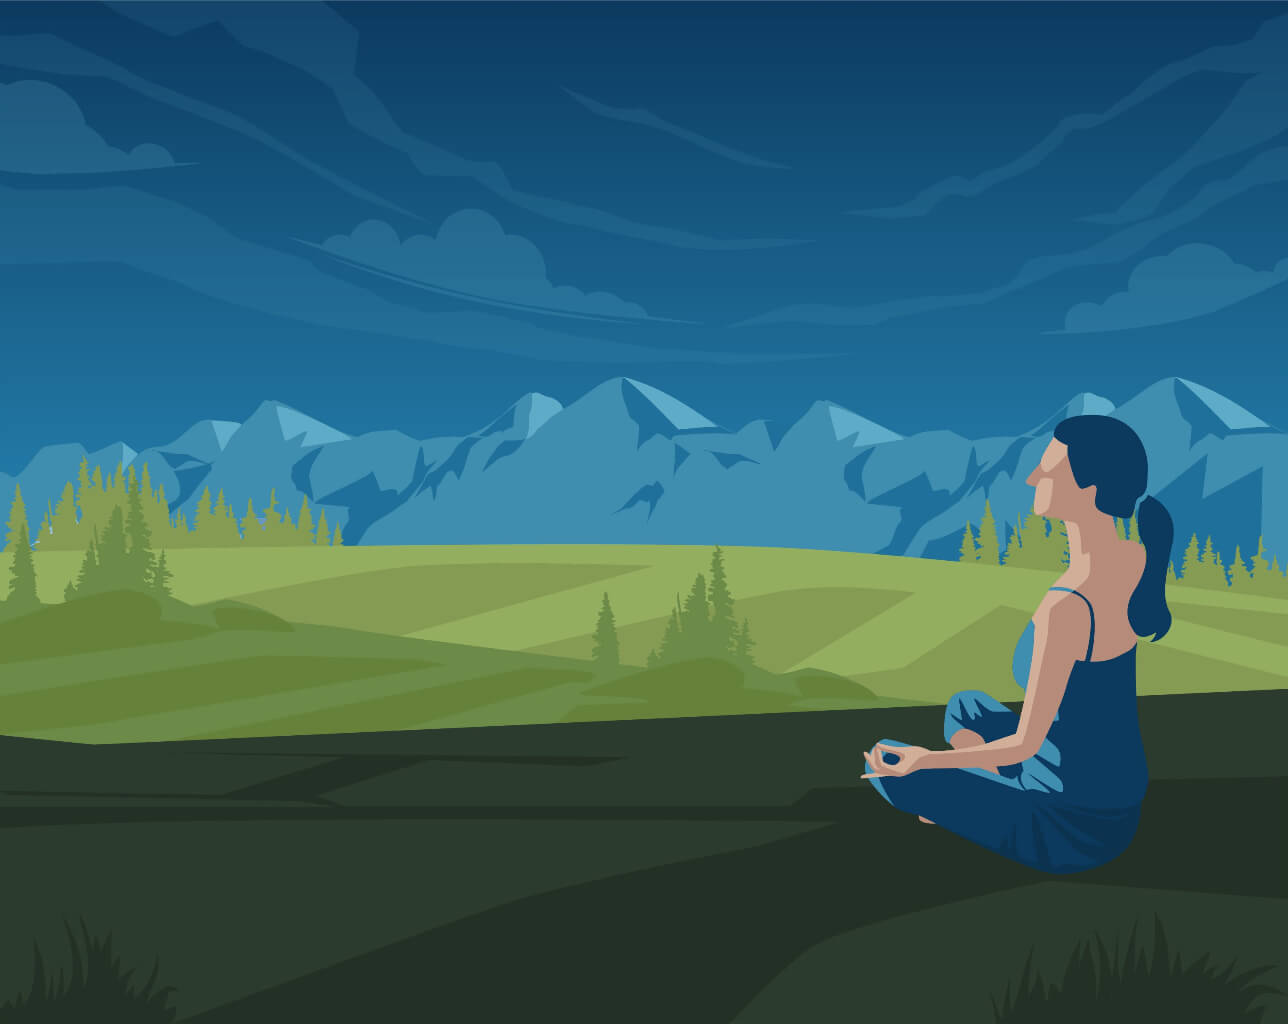 A woman embarking on a meditative journey in a picturesque field surrounded by majestic mountains.